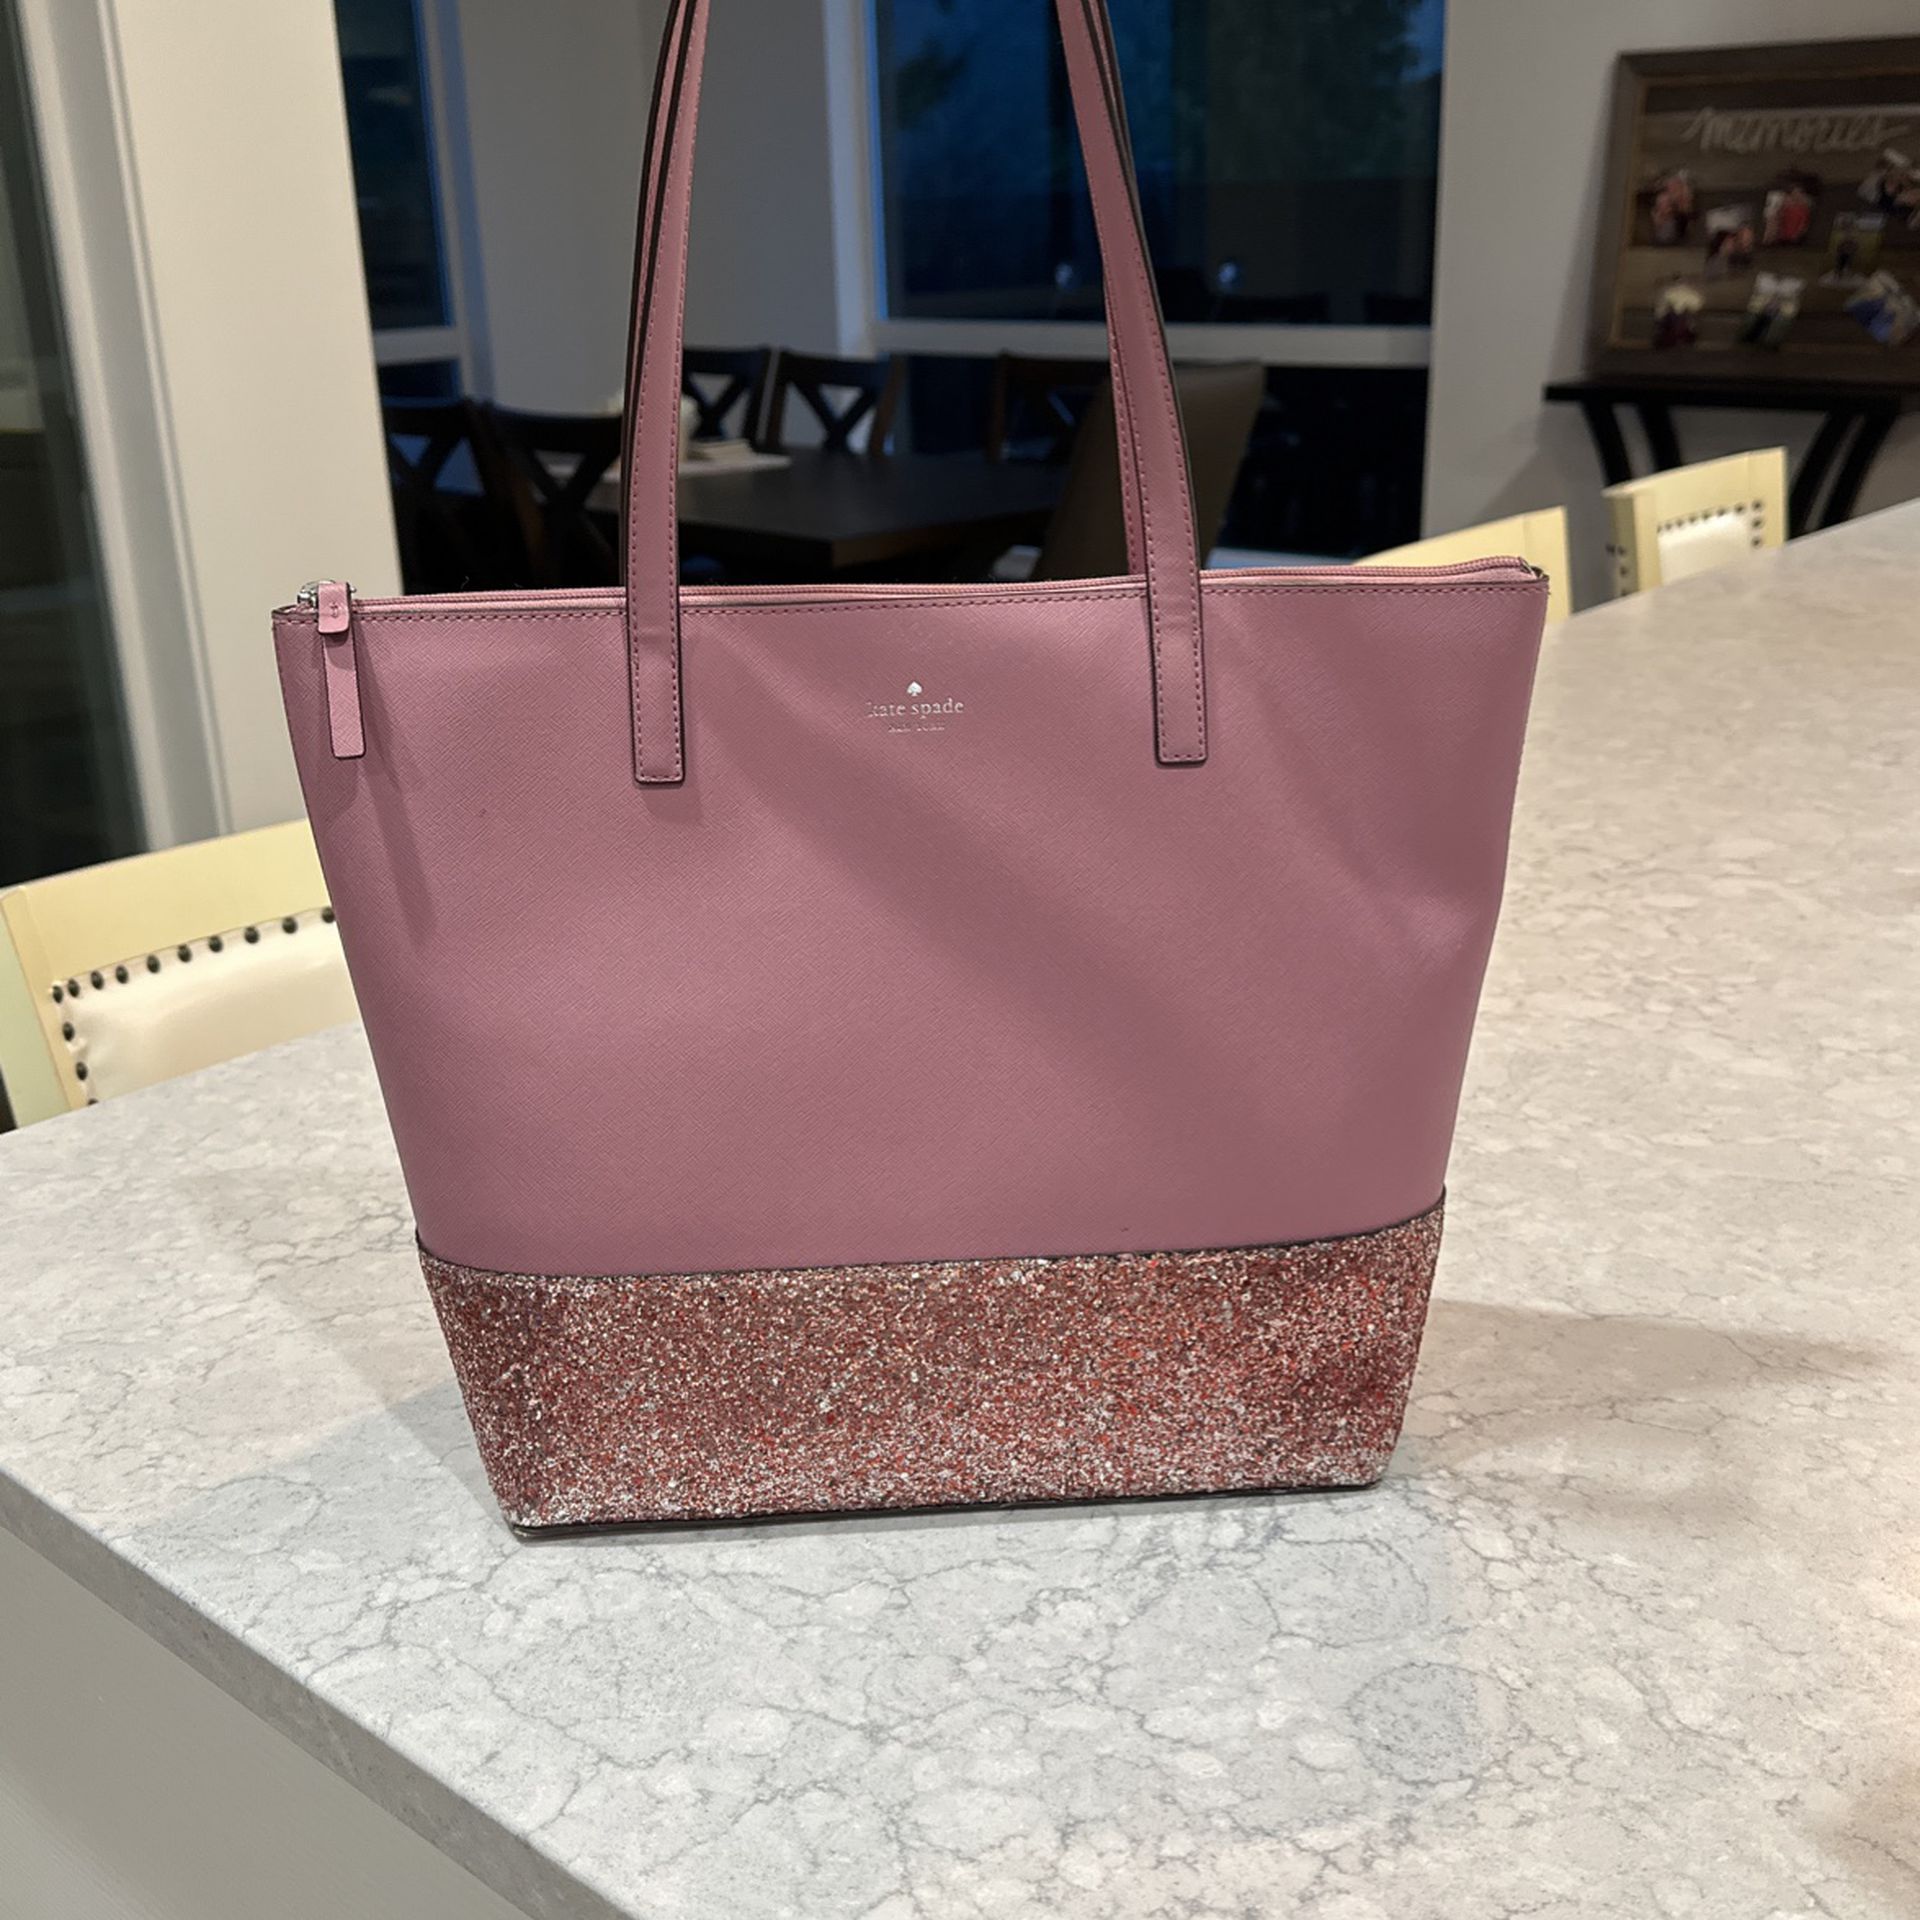 Kate Spade Tote for Sale in Federal Way, WA - OfferUp